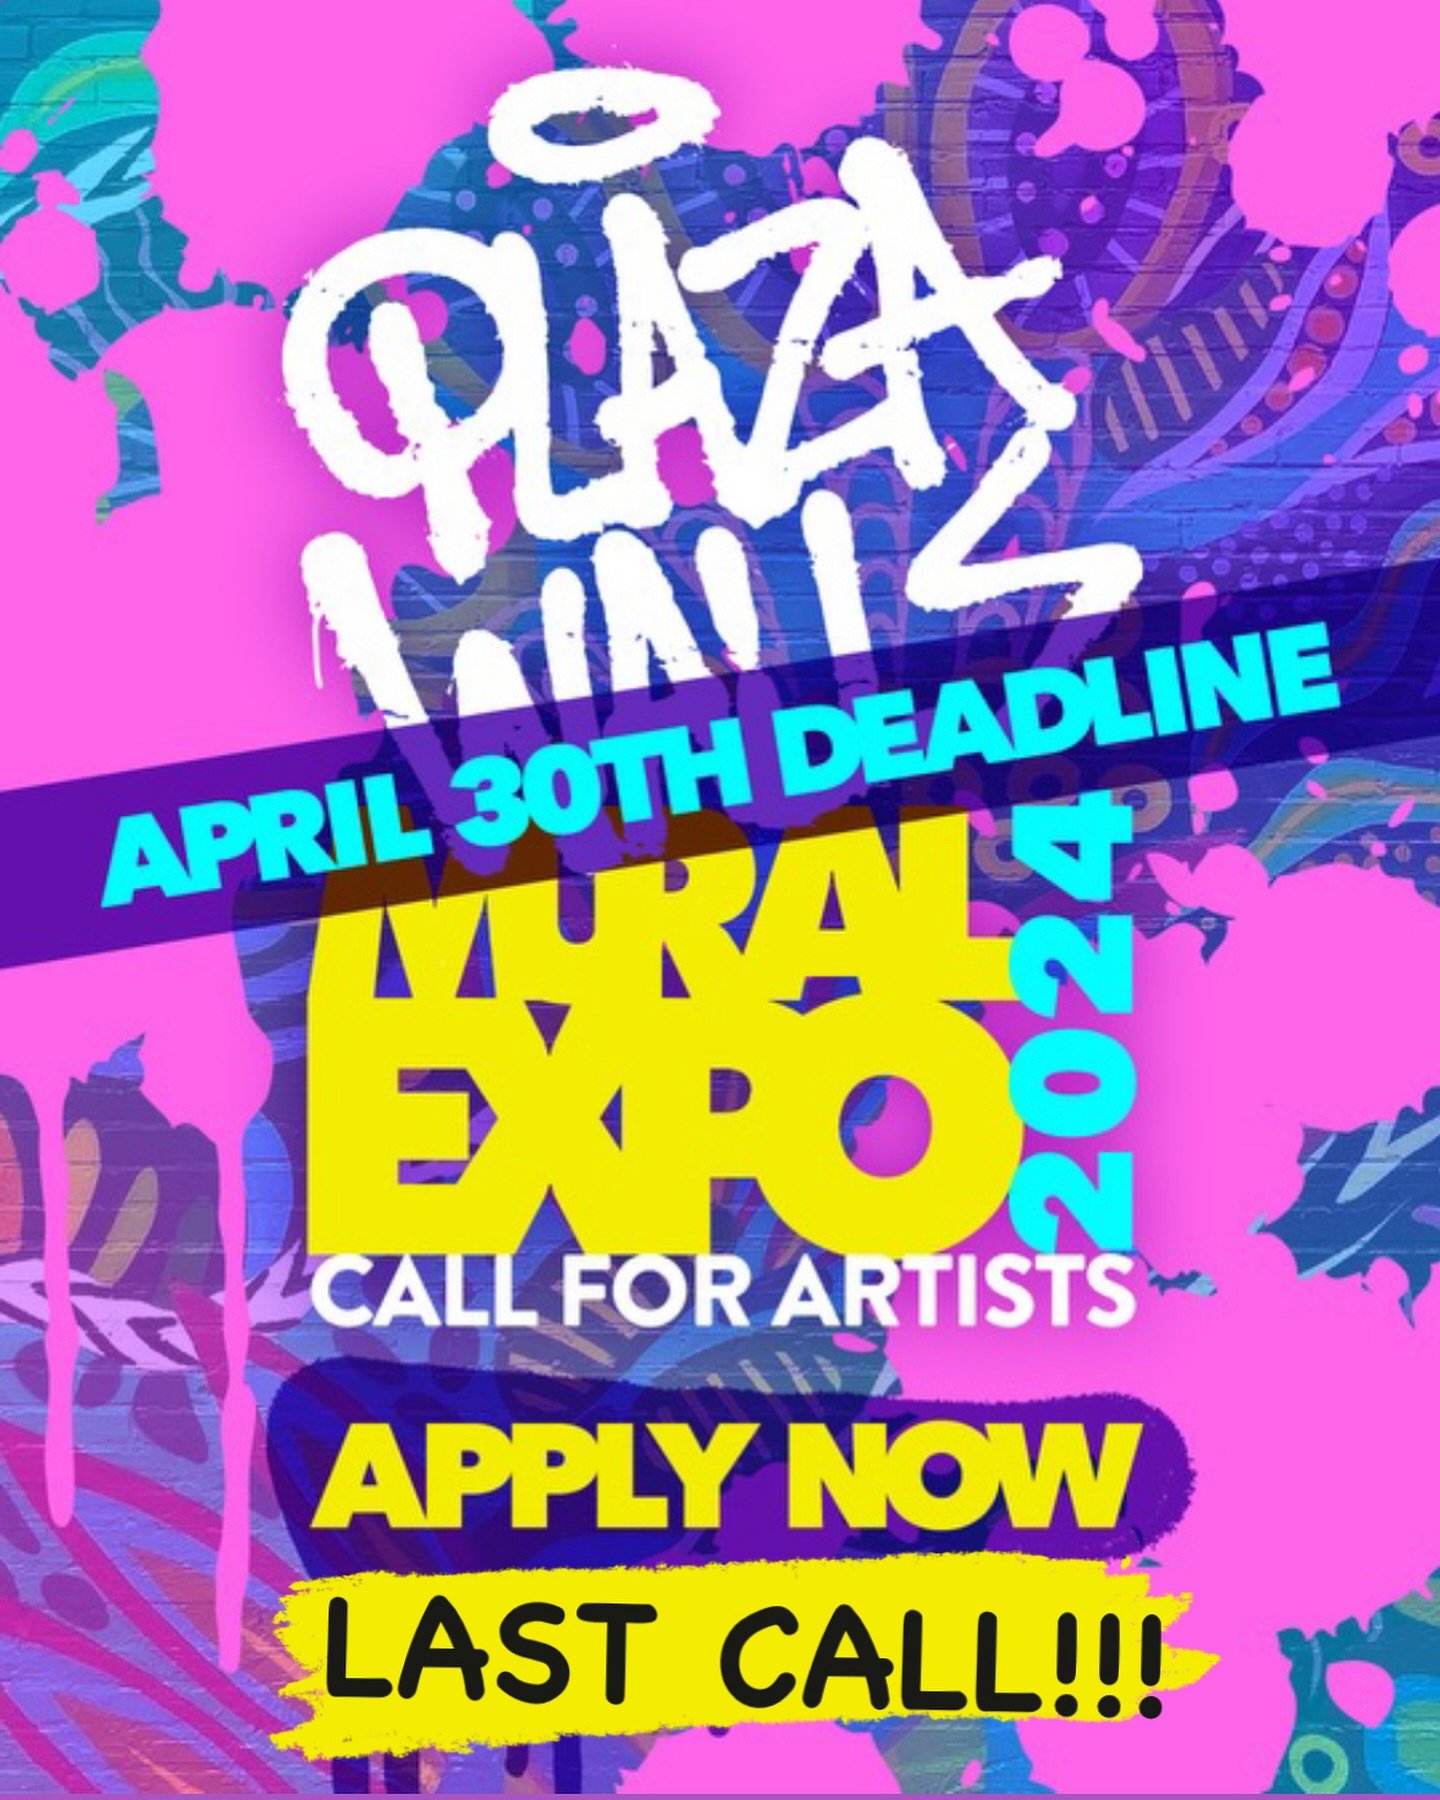 🚨LAST CALL FOR ARTISTS!!!🚨
Only 36 hours left to apply for the 2024 Mural Expo!!
✨LINK IN BIO!!!✨DEADLINE IS APRIL 30th @ Midnight!!!✅
👉 Artists, ready to make your mark at Plaza Walls? 🎨
Join us as we celebrate 9 years of public art:
🔸 Sep 28th